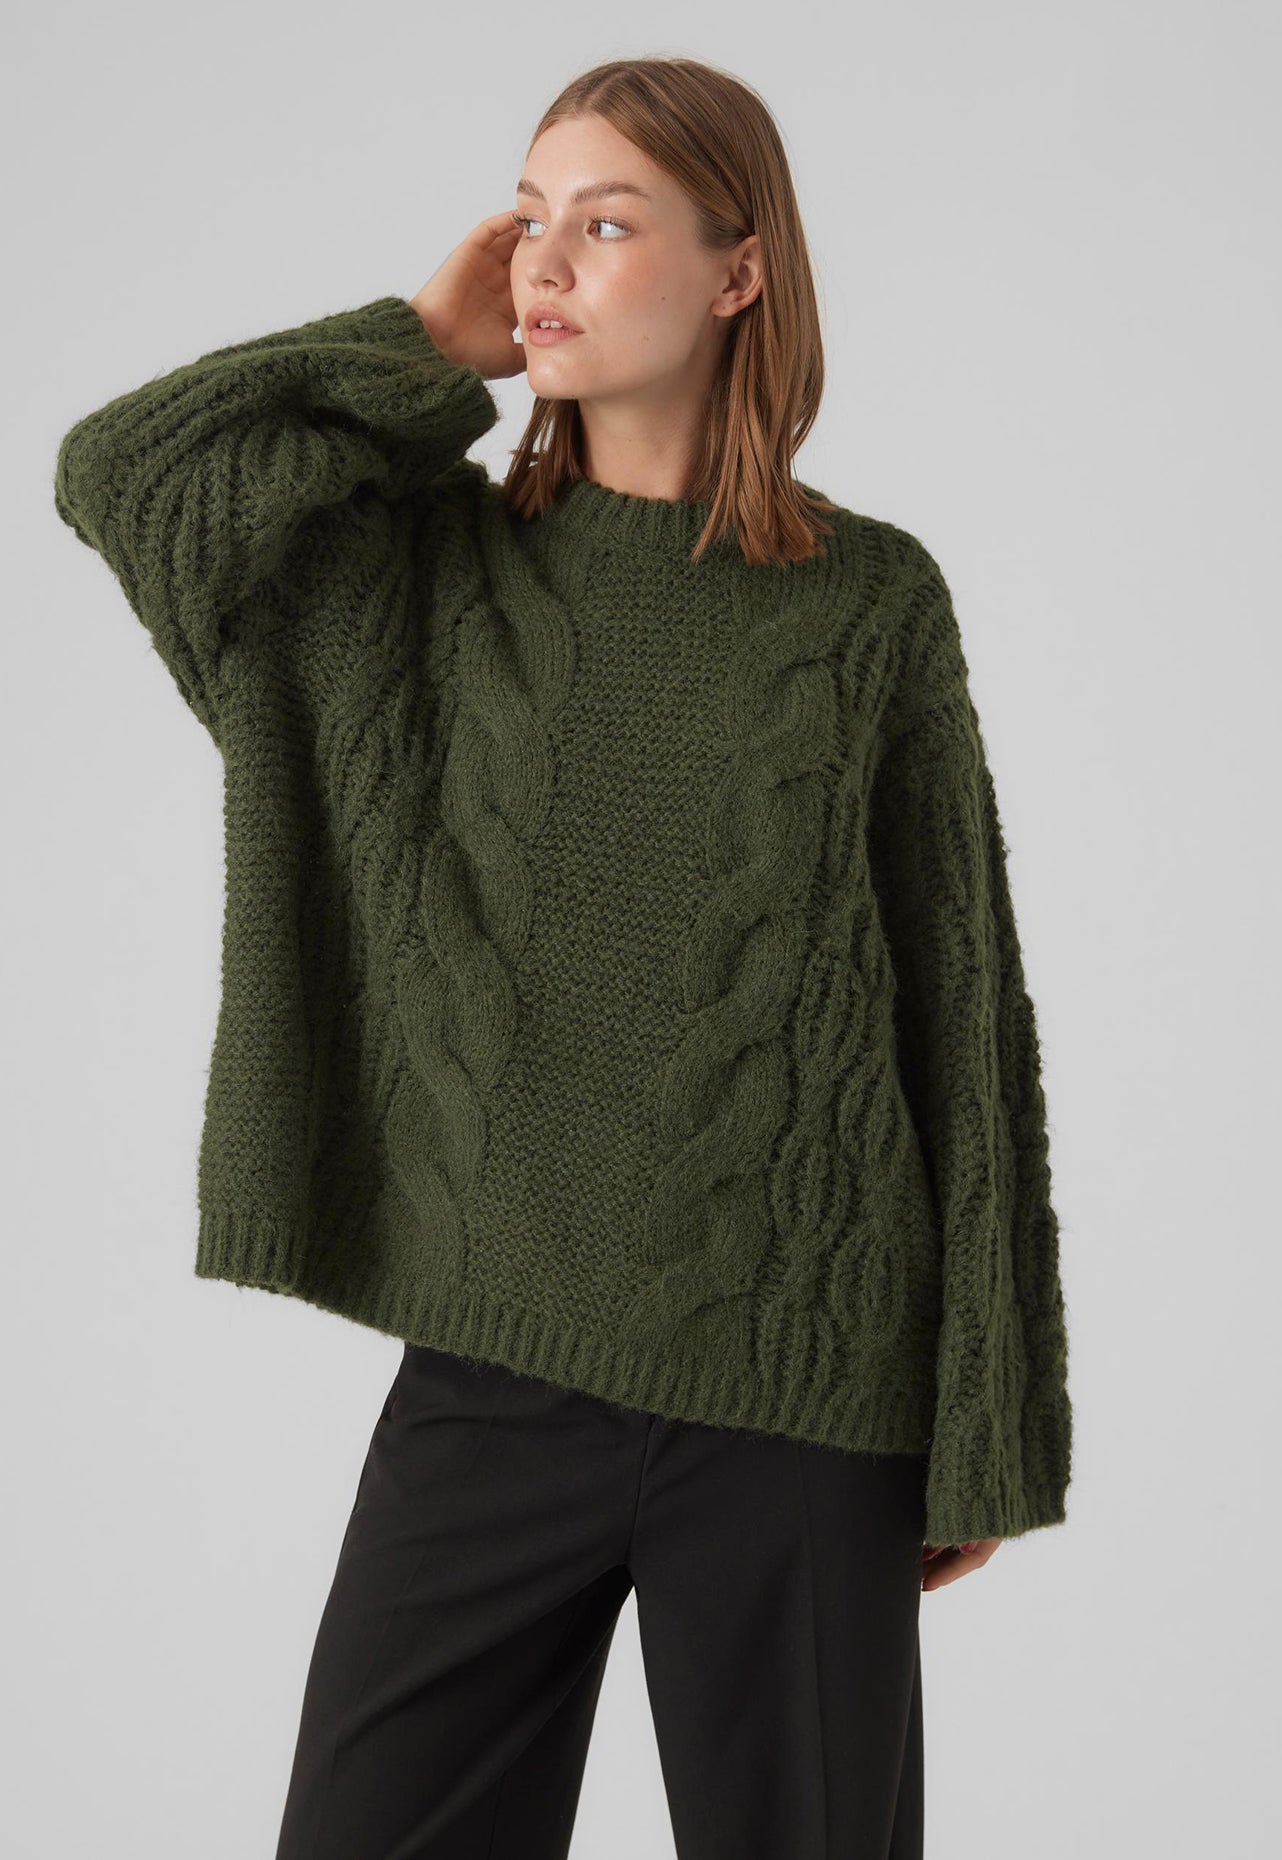 VERO MODA Vea Premium Chunky Cable Knit Fluffy Jumper in Khaki Green - One Nation Clothing